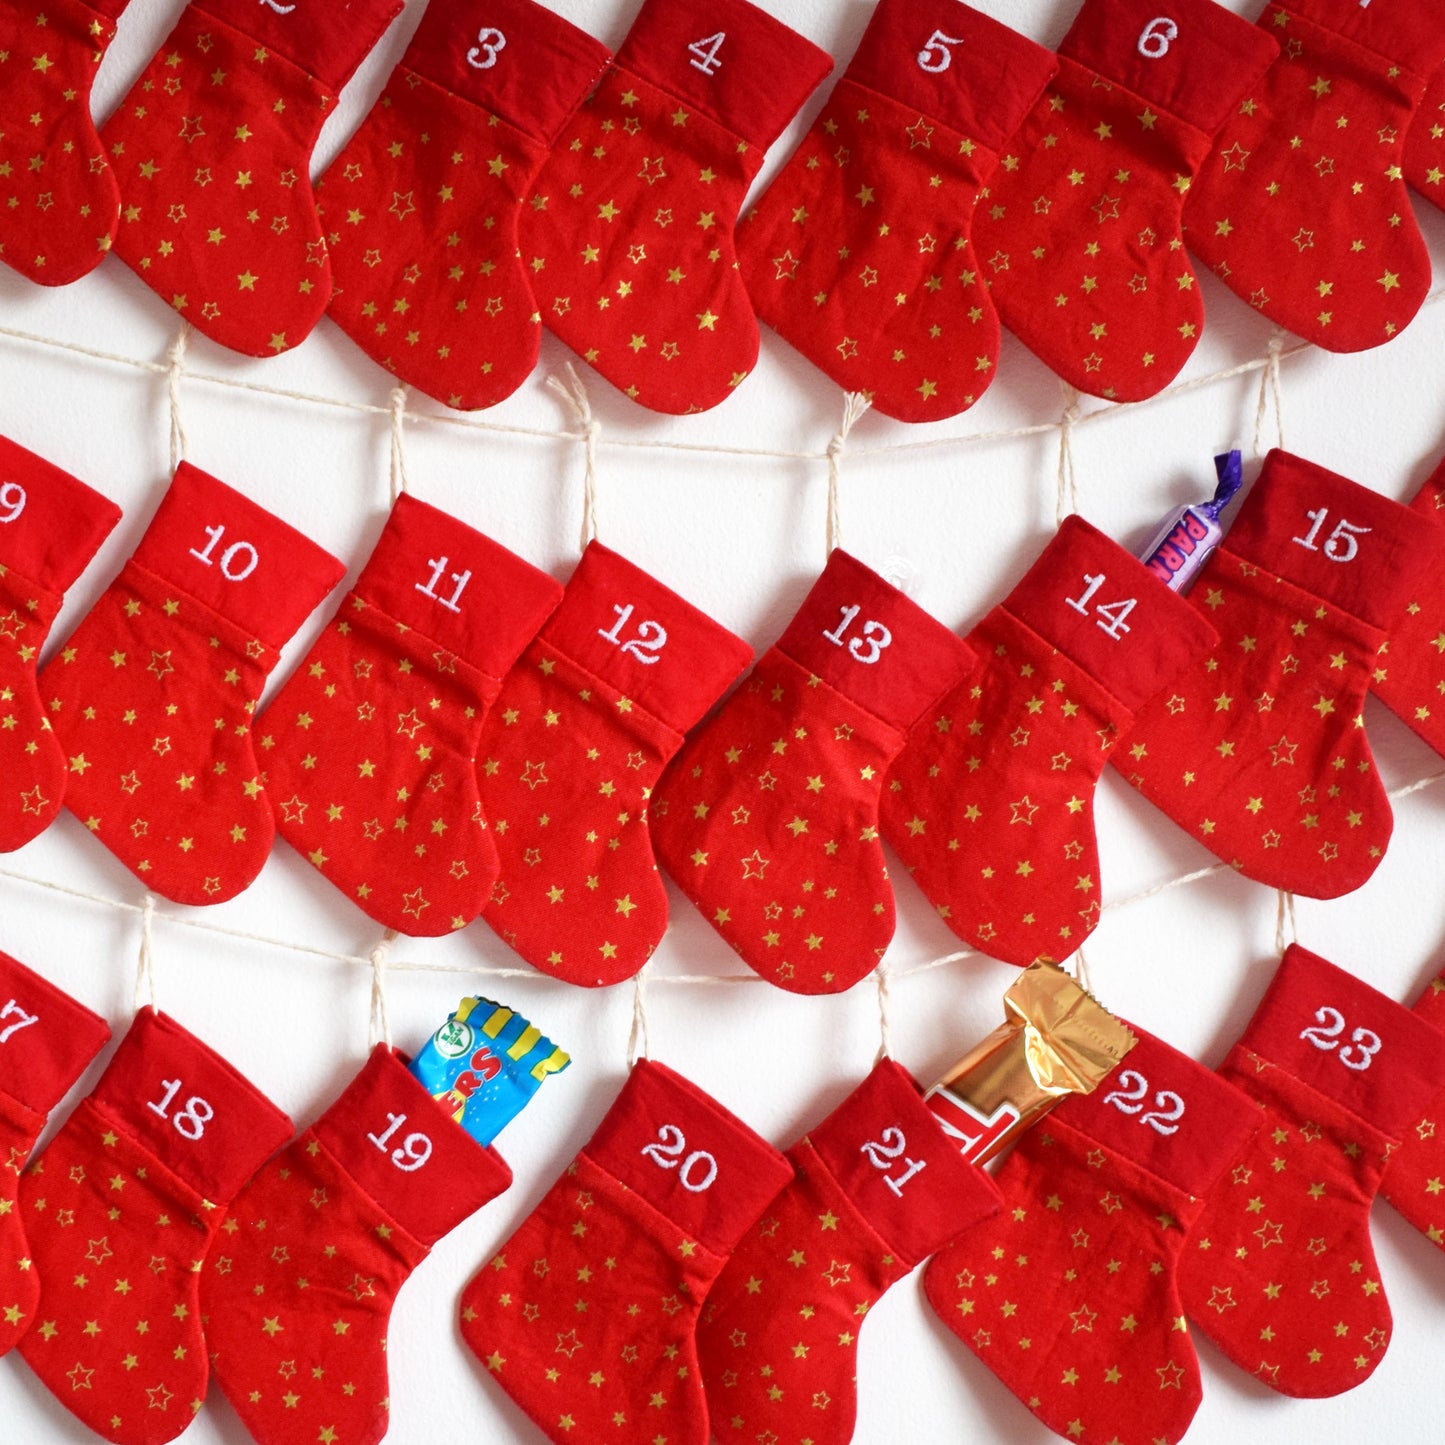 Red and Gold Star Stocking Advent Calendar Bunting